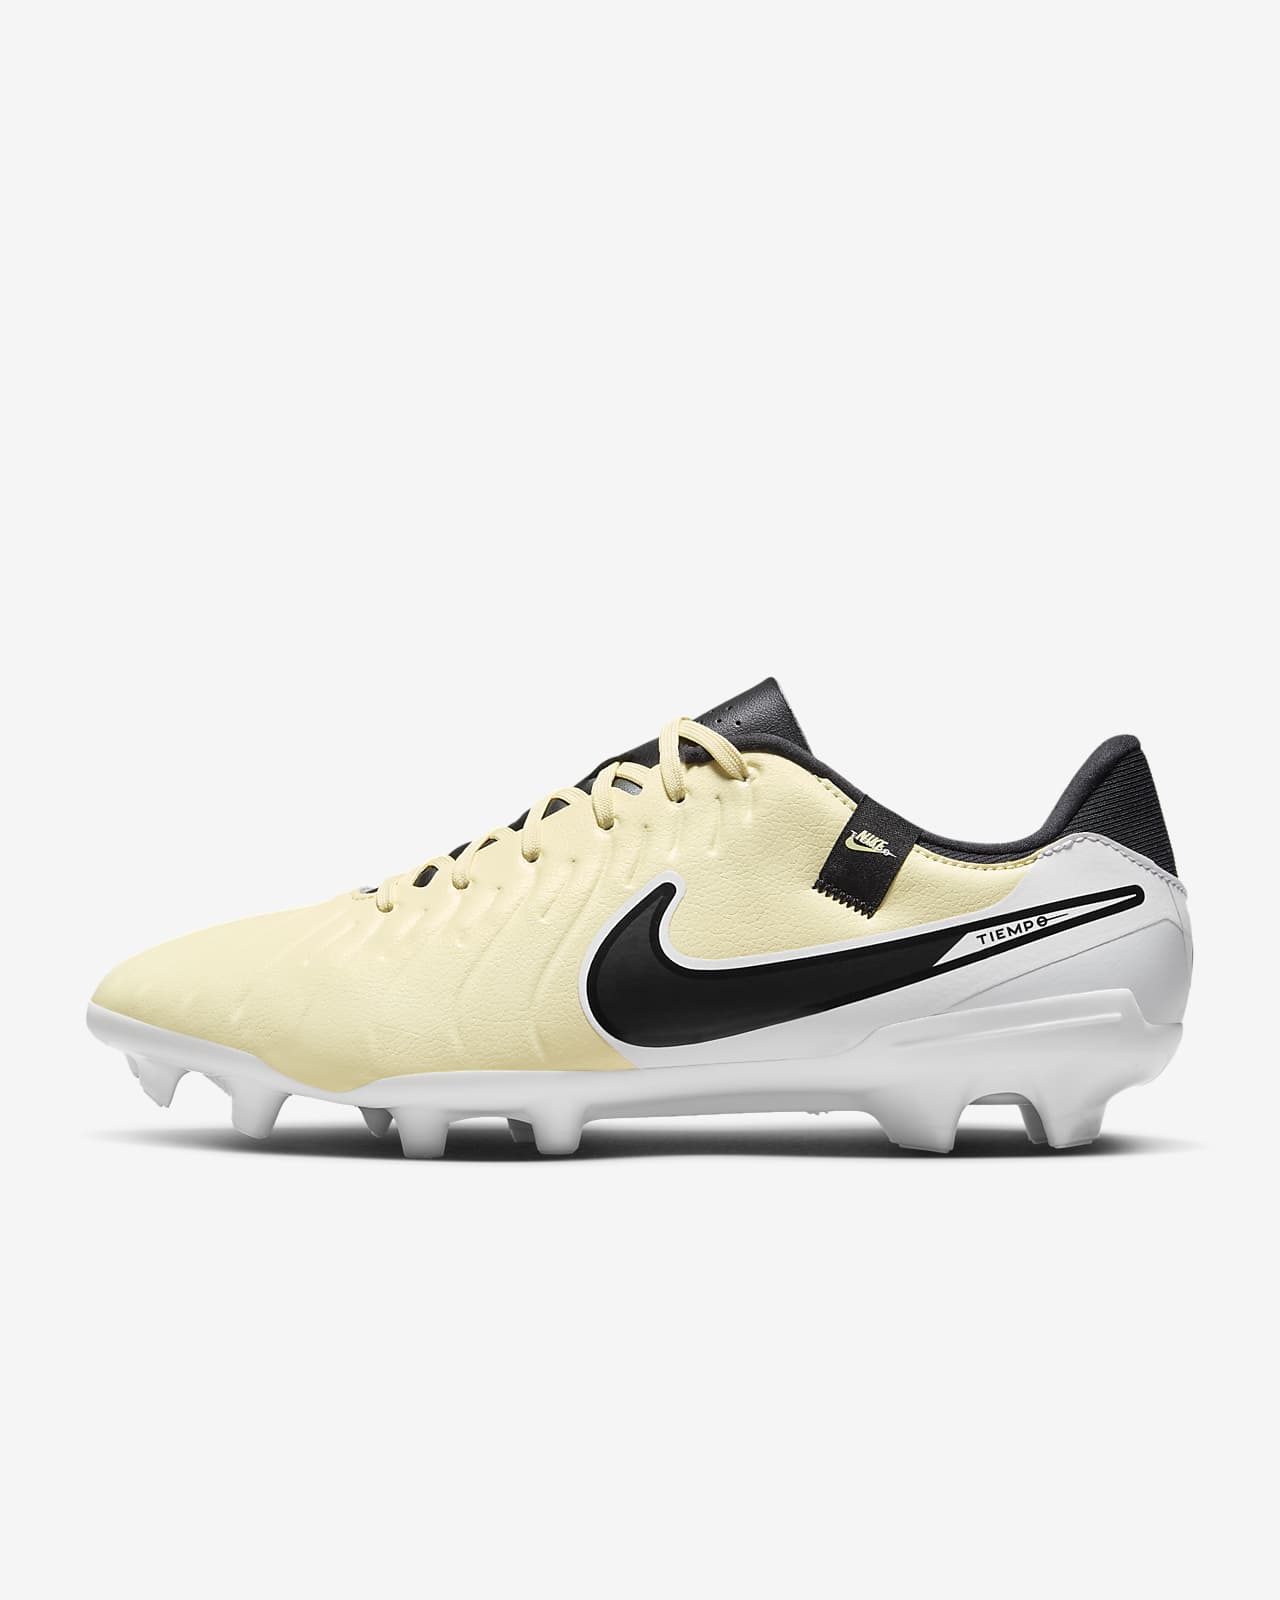 Nike Tiempo Legend Multi-Ground Cleats. Academy Low-Top 10 Soccer